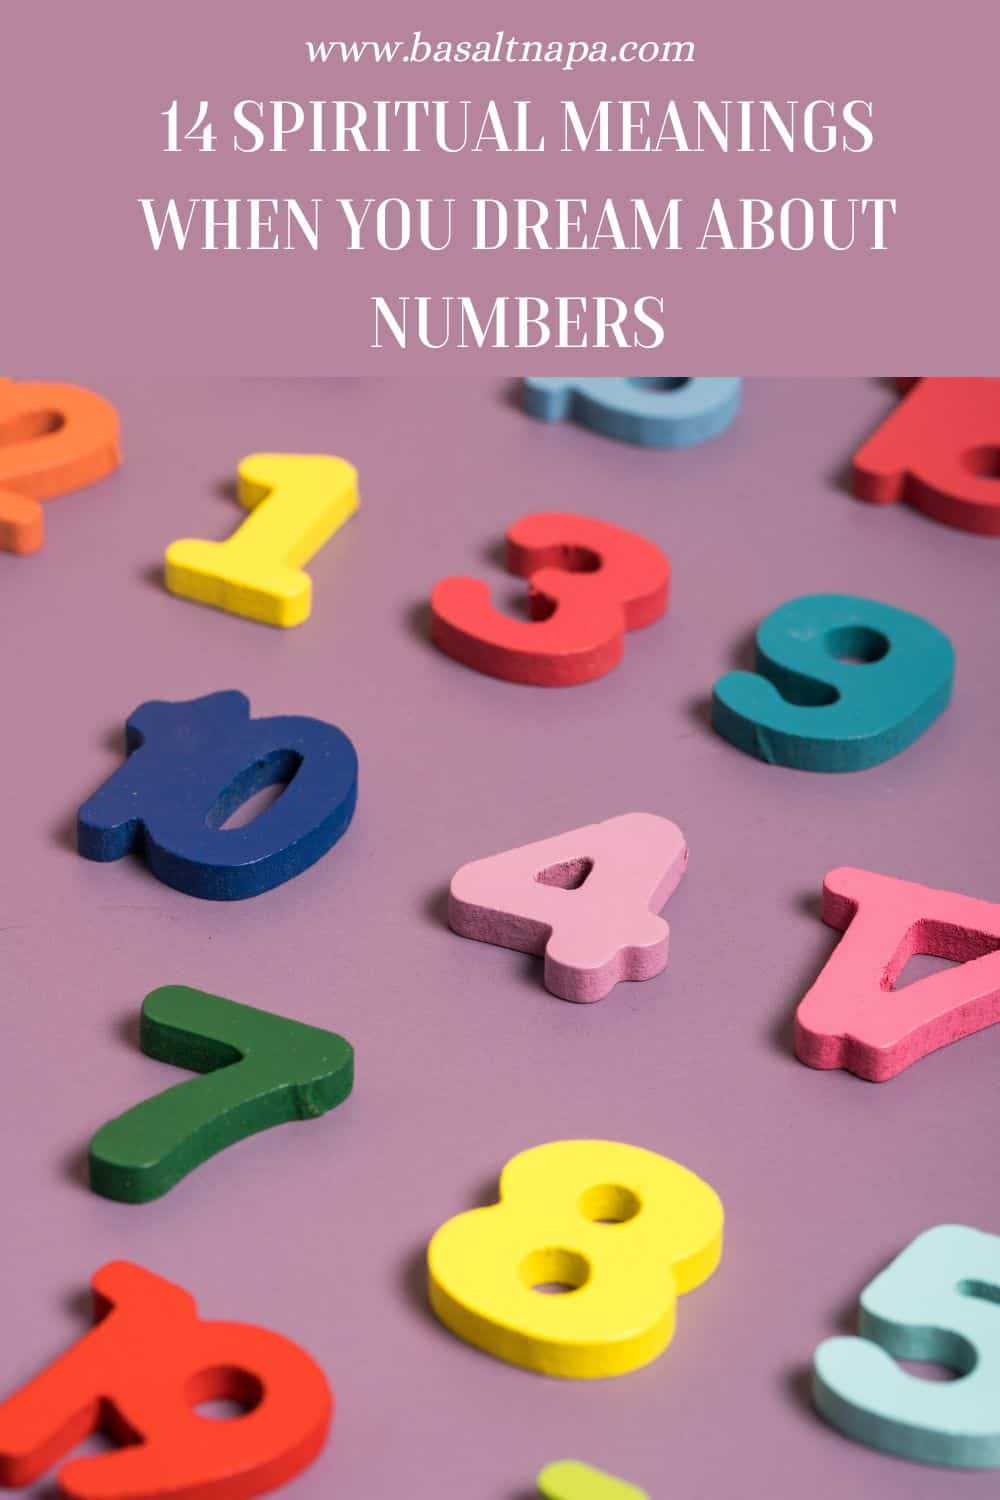 14 Spiritual Meanings When You Dream About Numbers